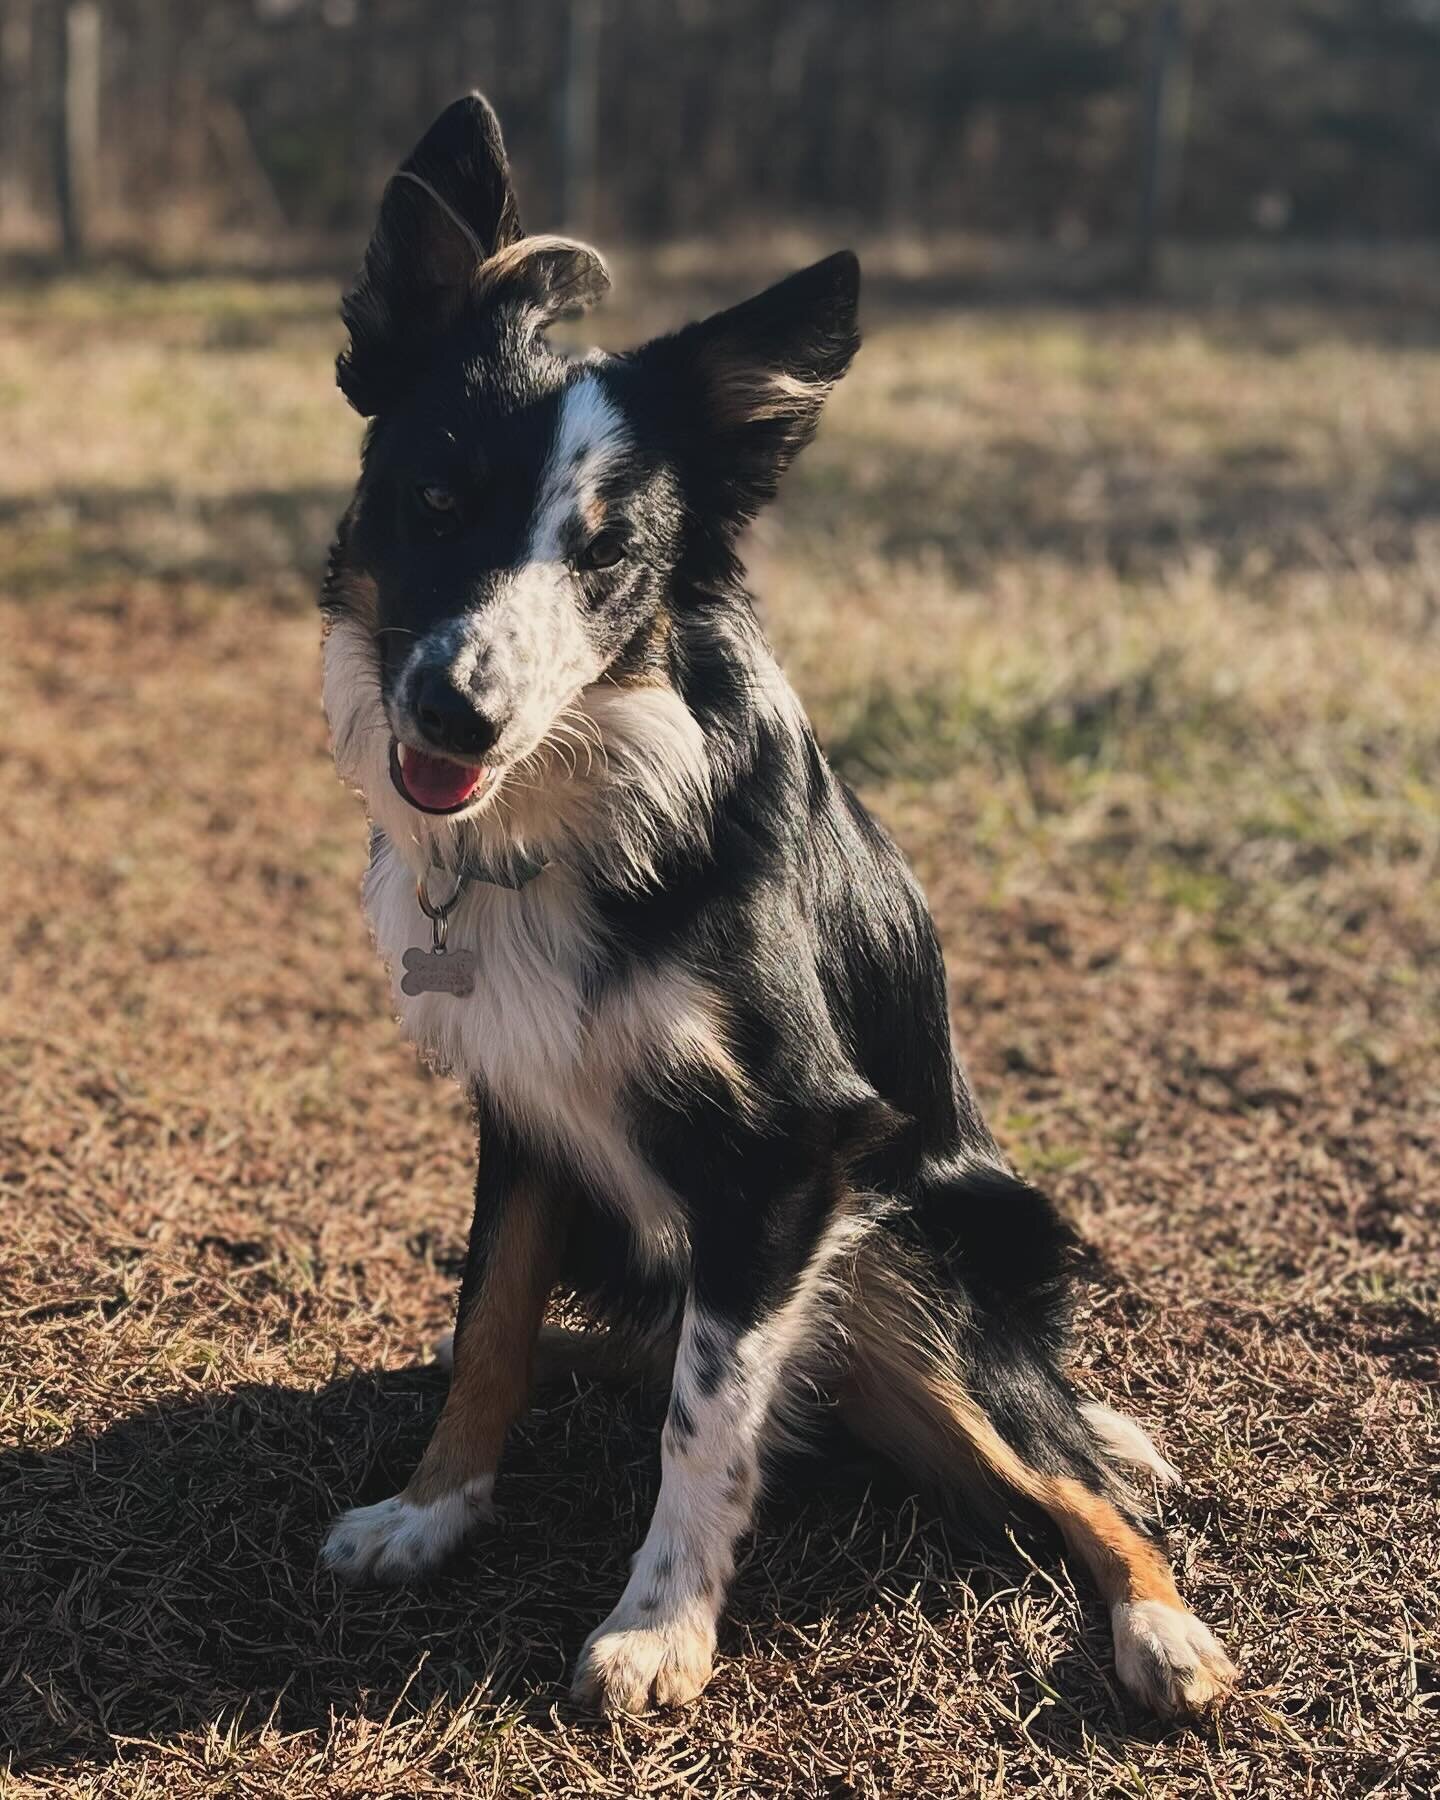 🐾 Braving the cold to check on the trees 🌳 

🧐Have one of our certified arborists out to check on your trees today to prepare for warmer days ahead ☀️

You may be lucky enough to meet Jed during our visit 🐶 

#arborist #dogs #bordercollie #arbori